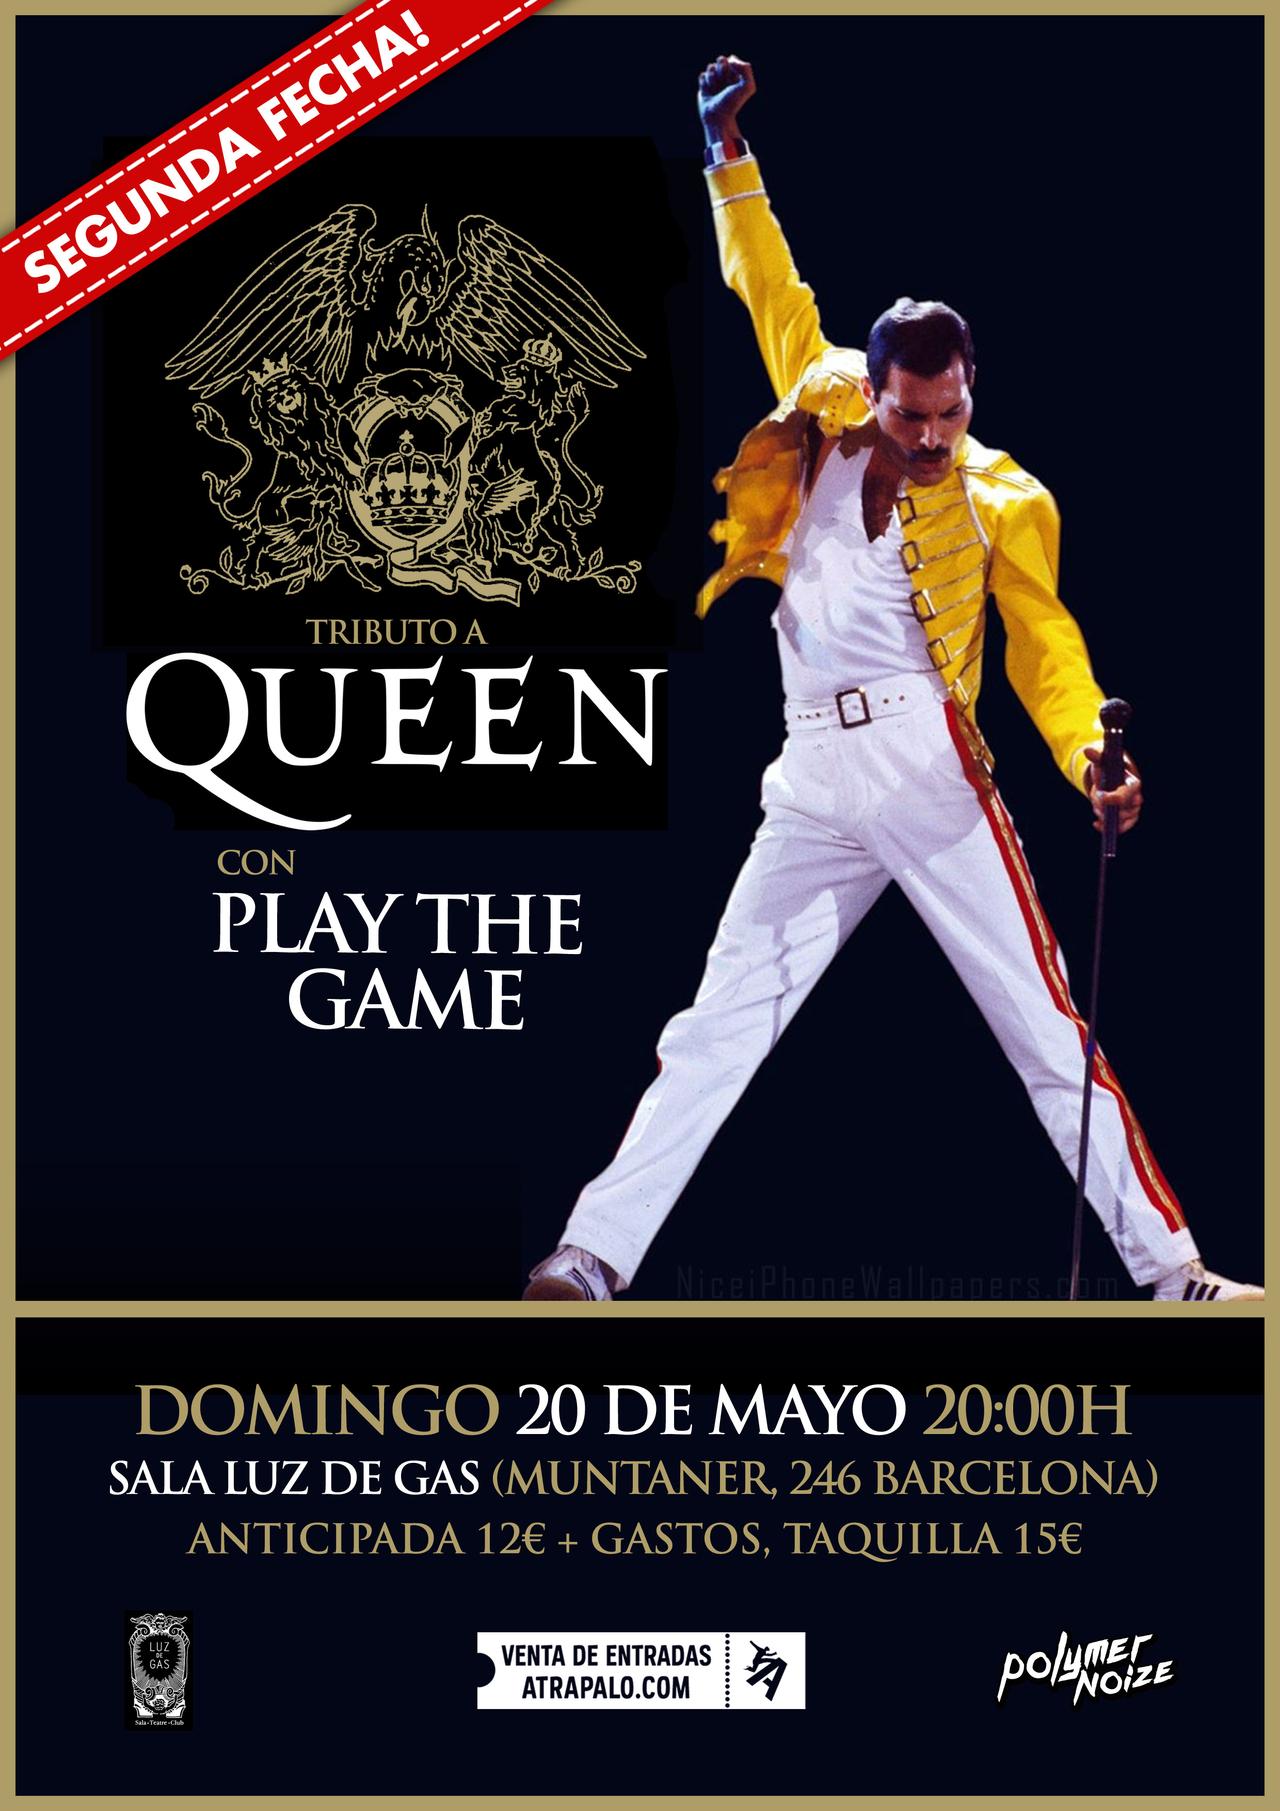 Tributo a Queen con Play the Game